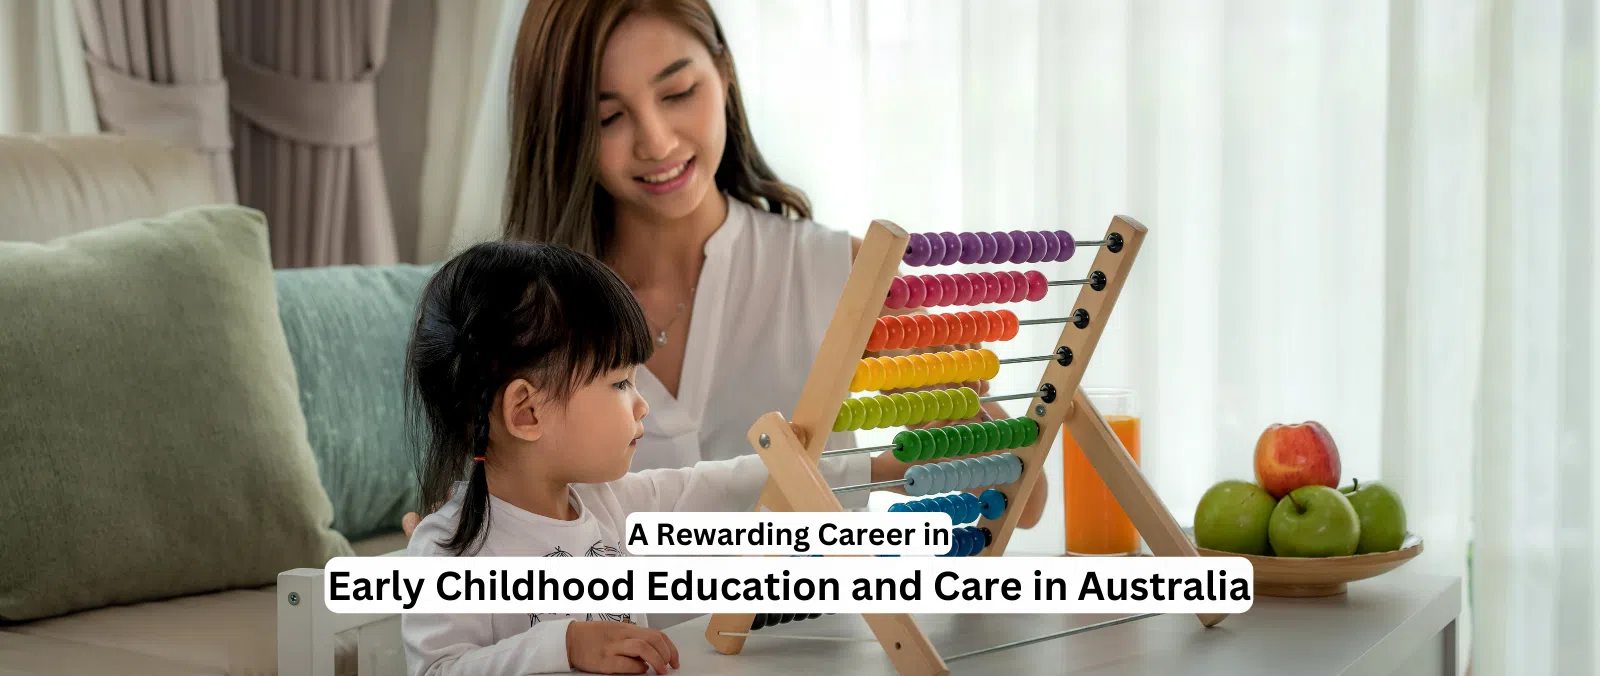 A Rewarding Career in Early Childhood Education and Care in Australia